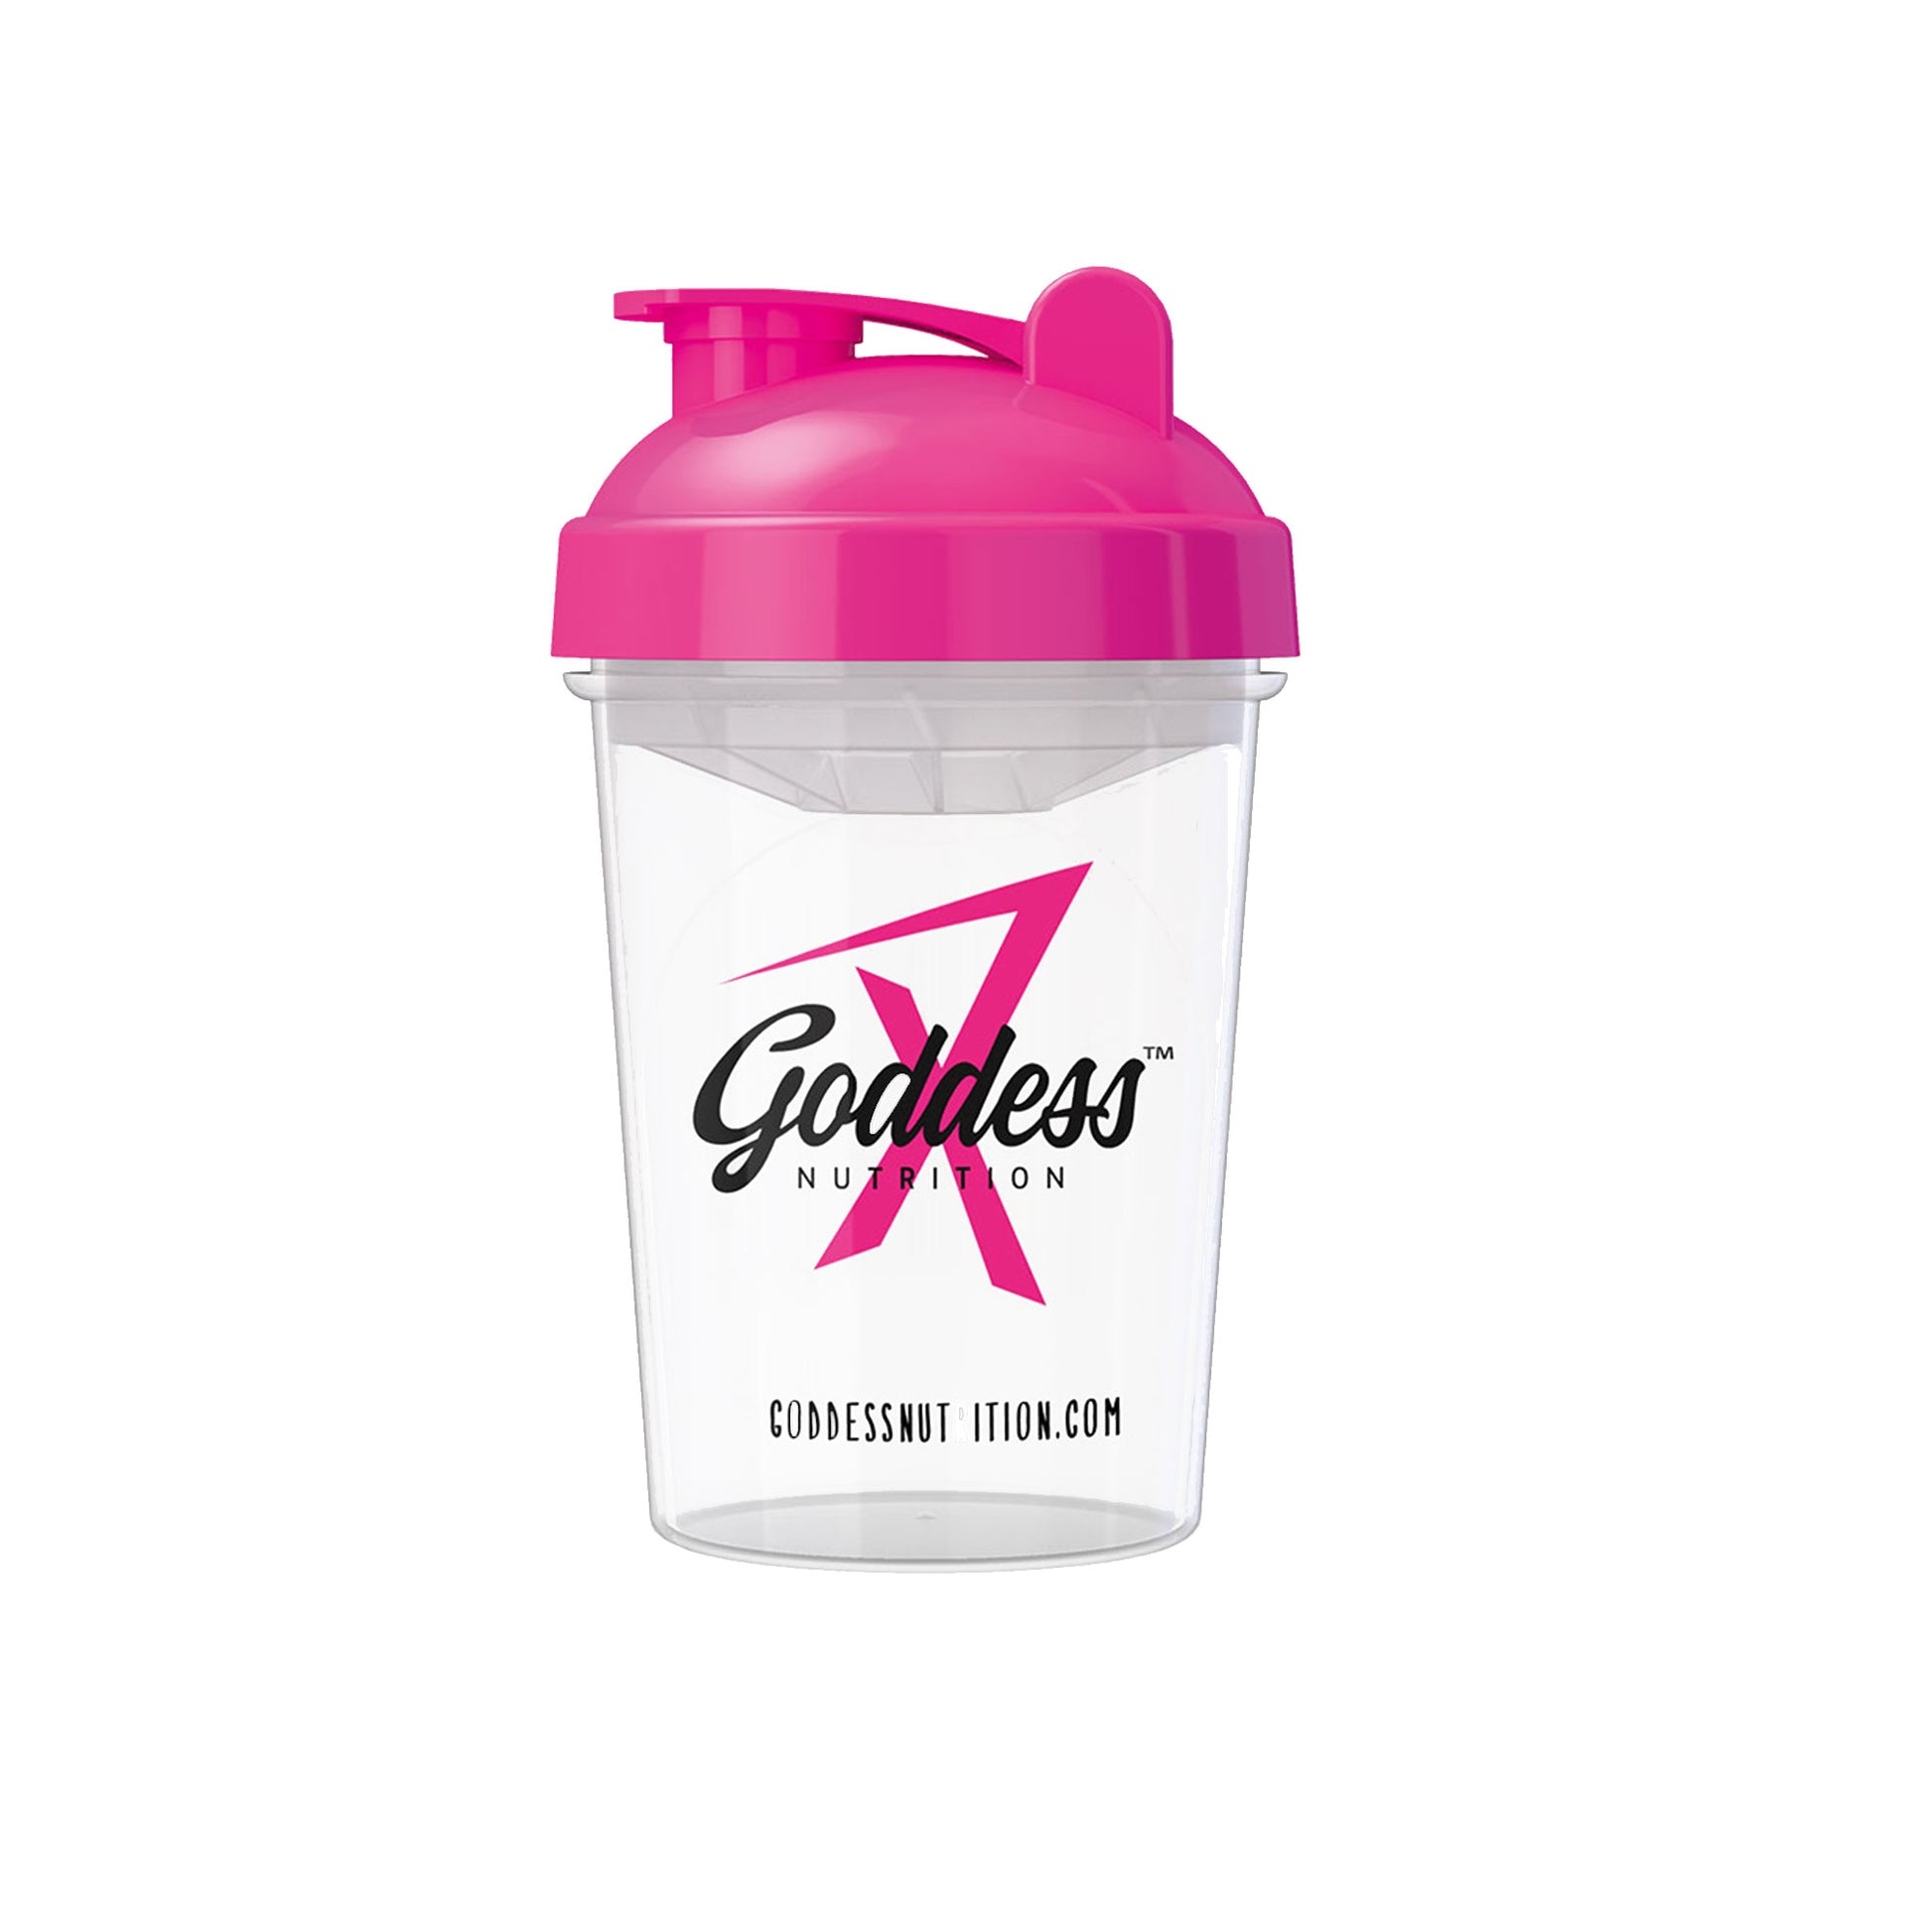 Goddess Nutrition Transparent Gym Shaker for Pre-workout or Protein